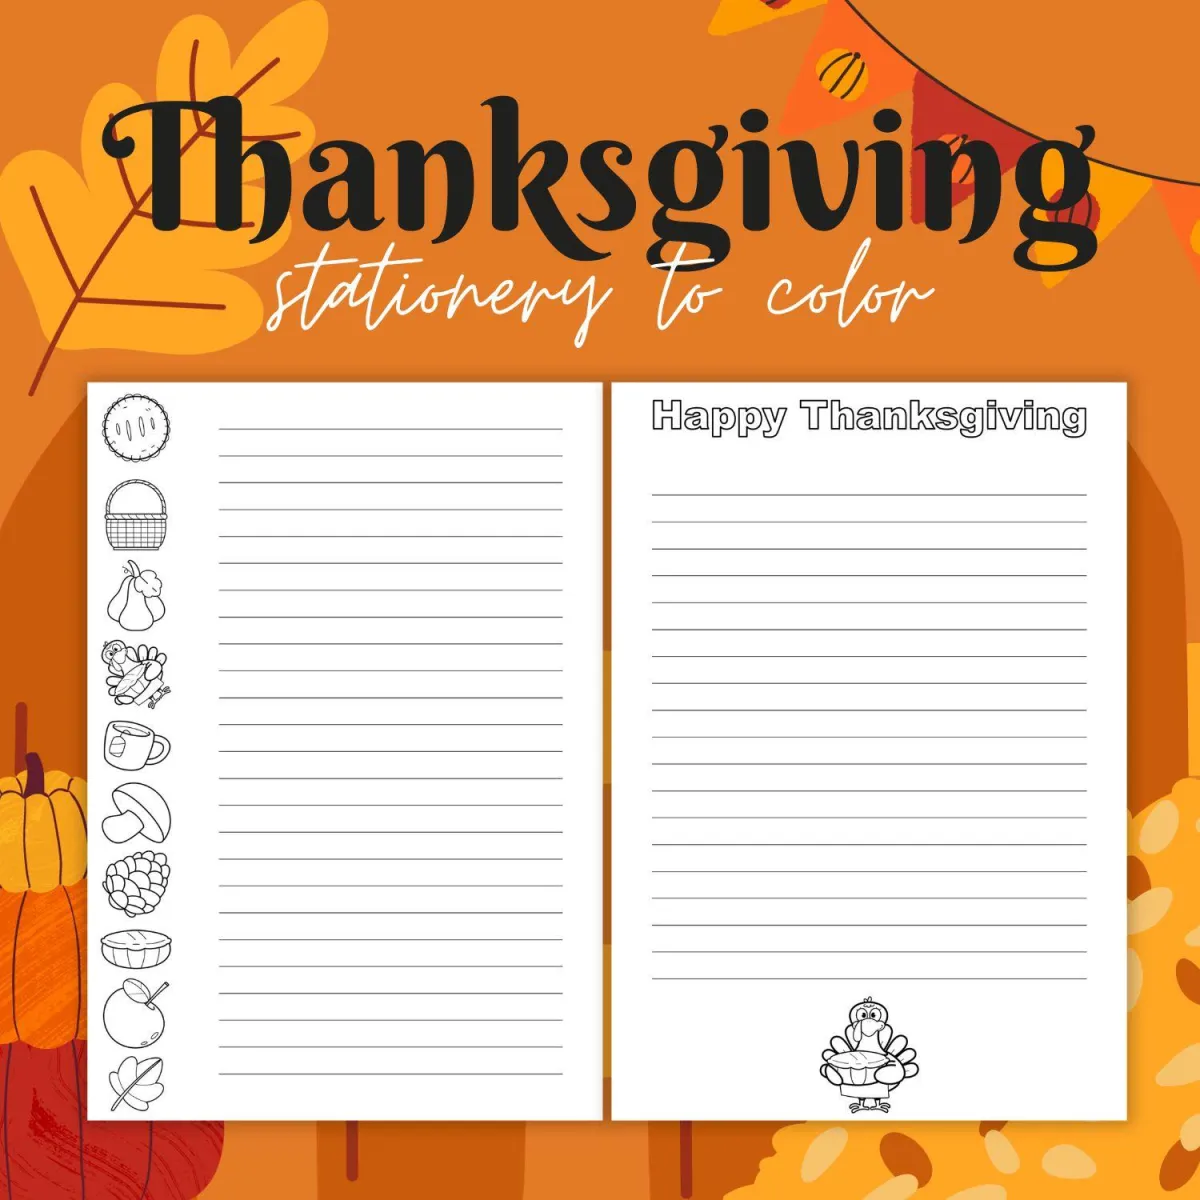 Thanksgiving stationery to color